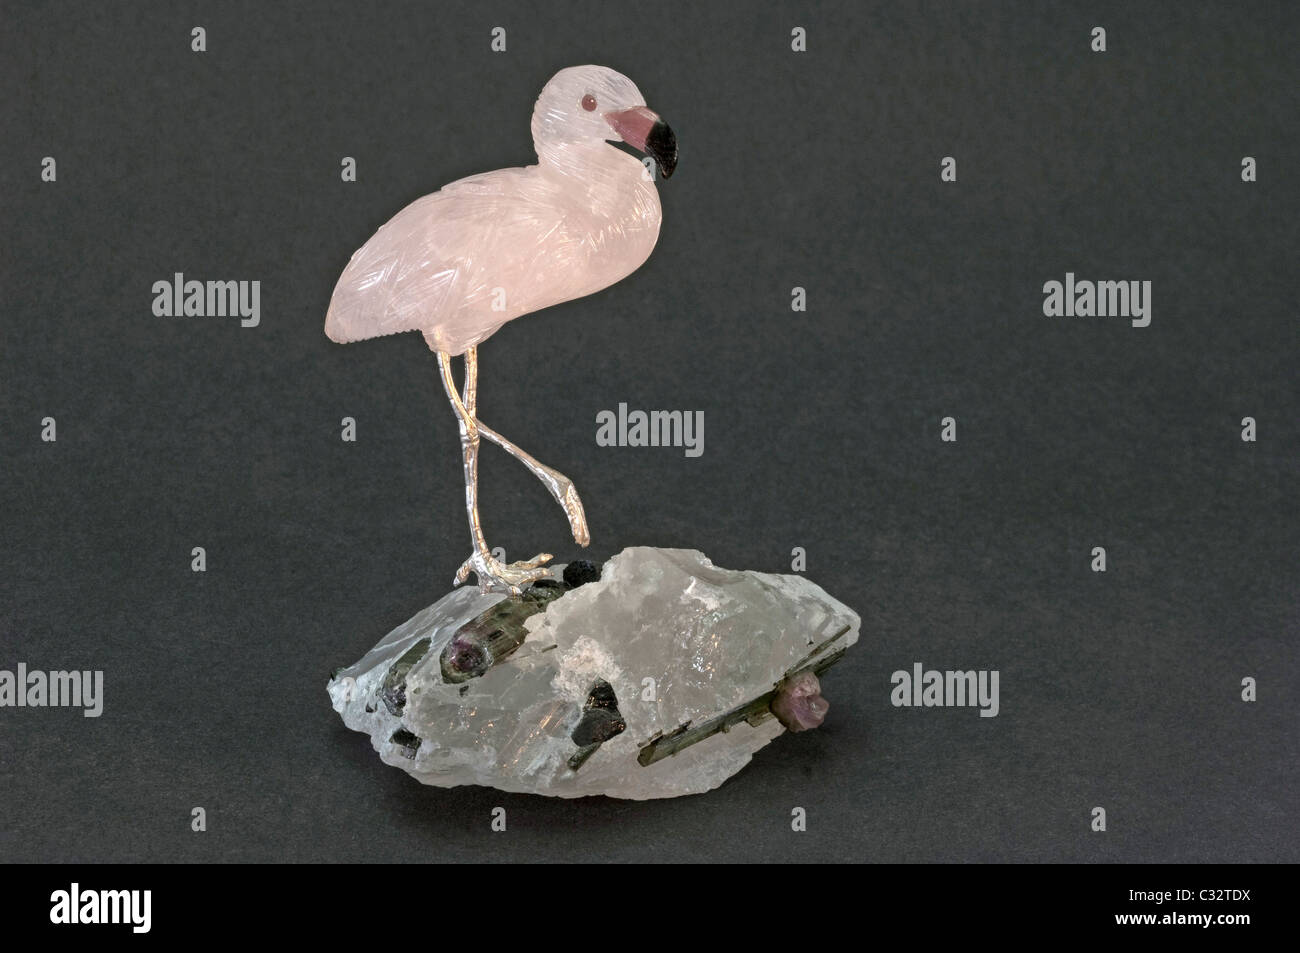 Flamingo made of Rose Quartz standing on a crystal with tourmaline. Studio picture against a blue background. Stock Photo